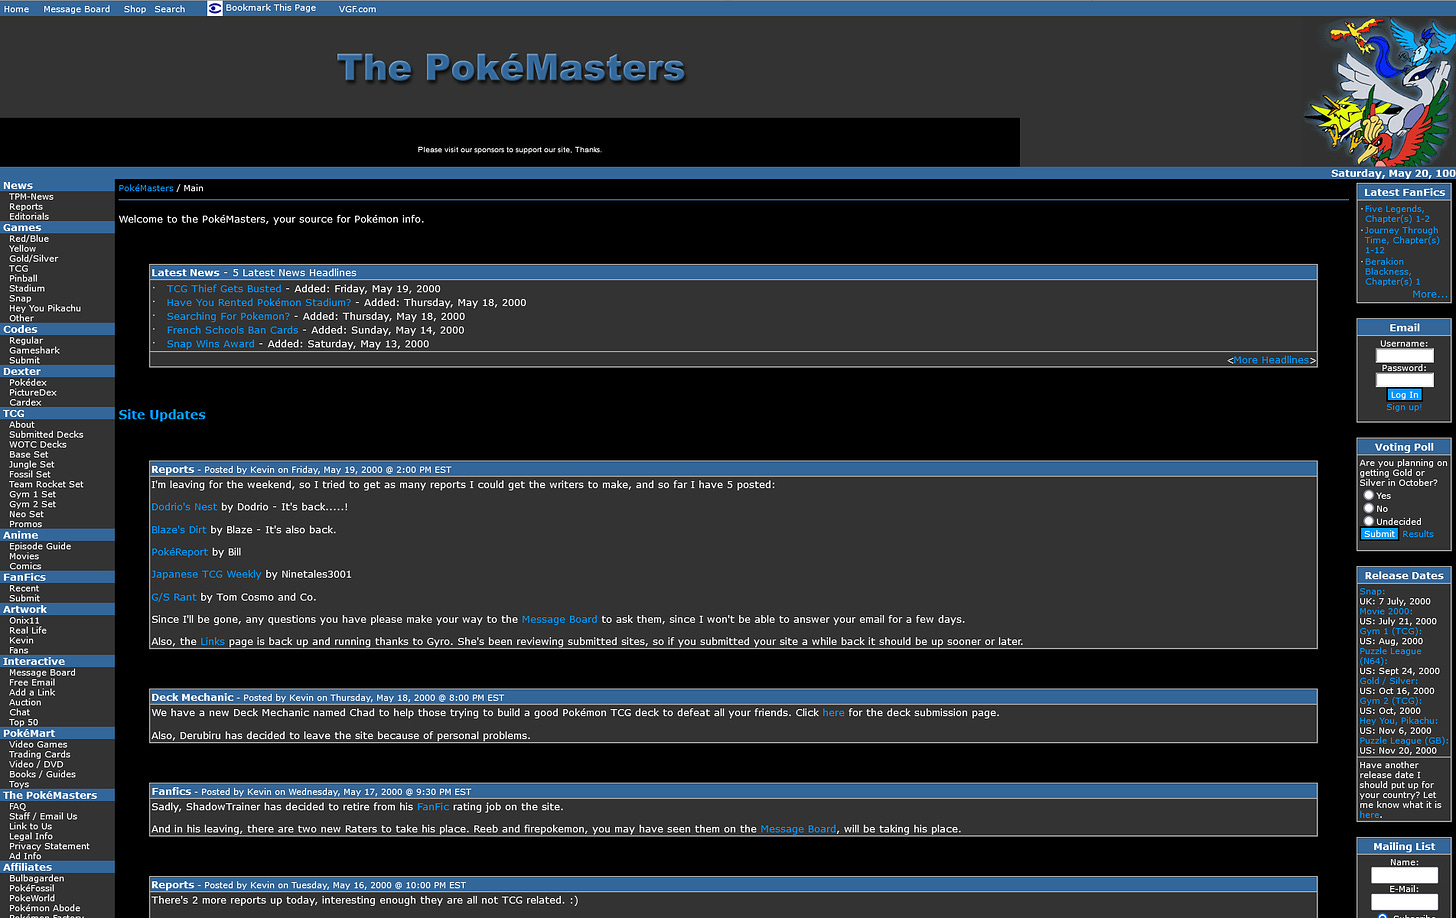 The PokéMasters website from May 2000